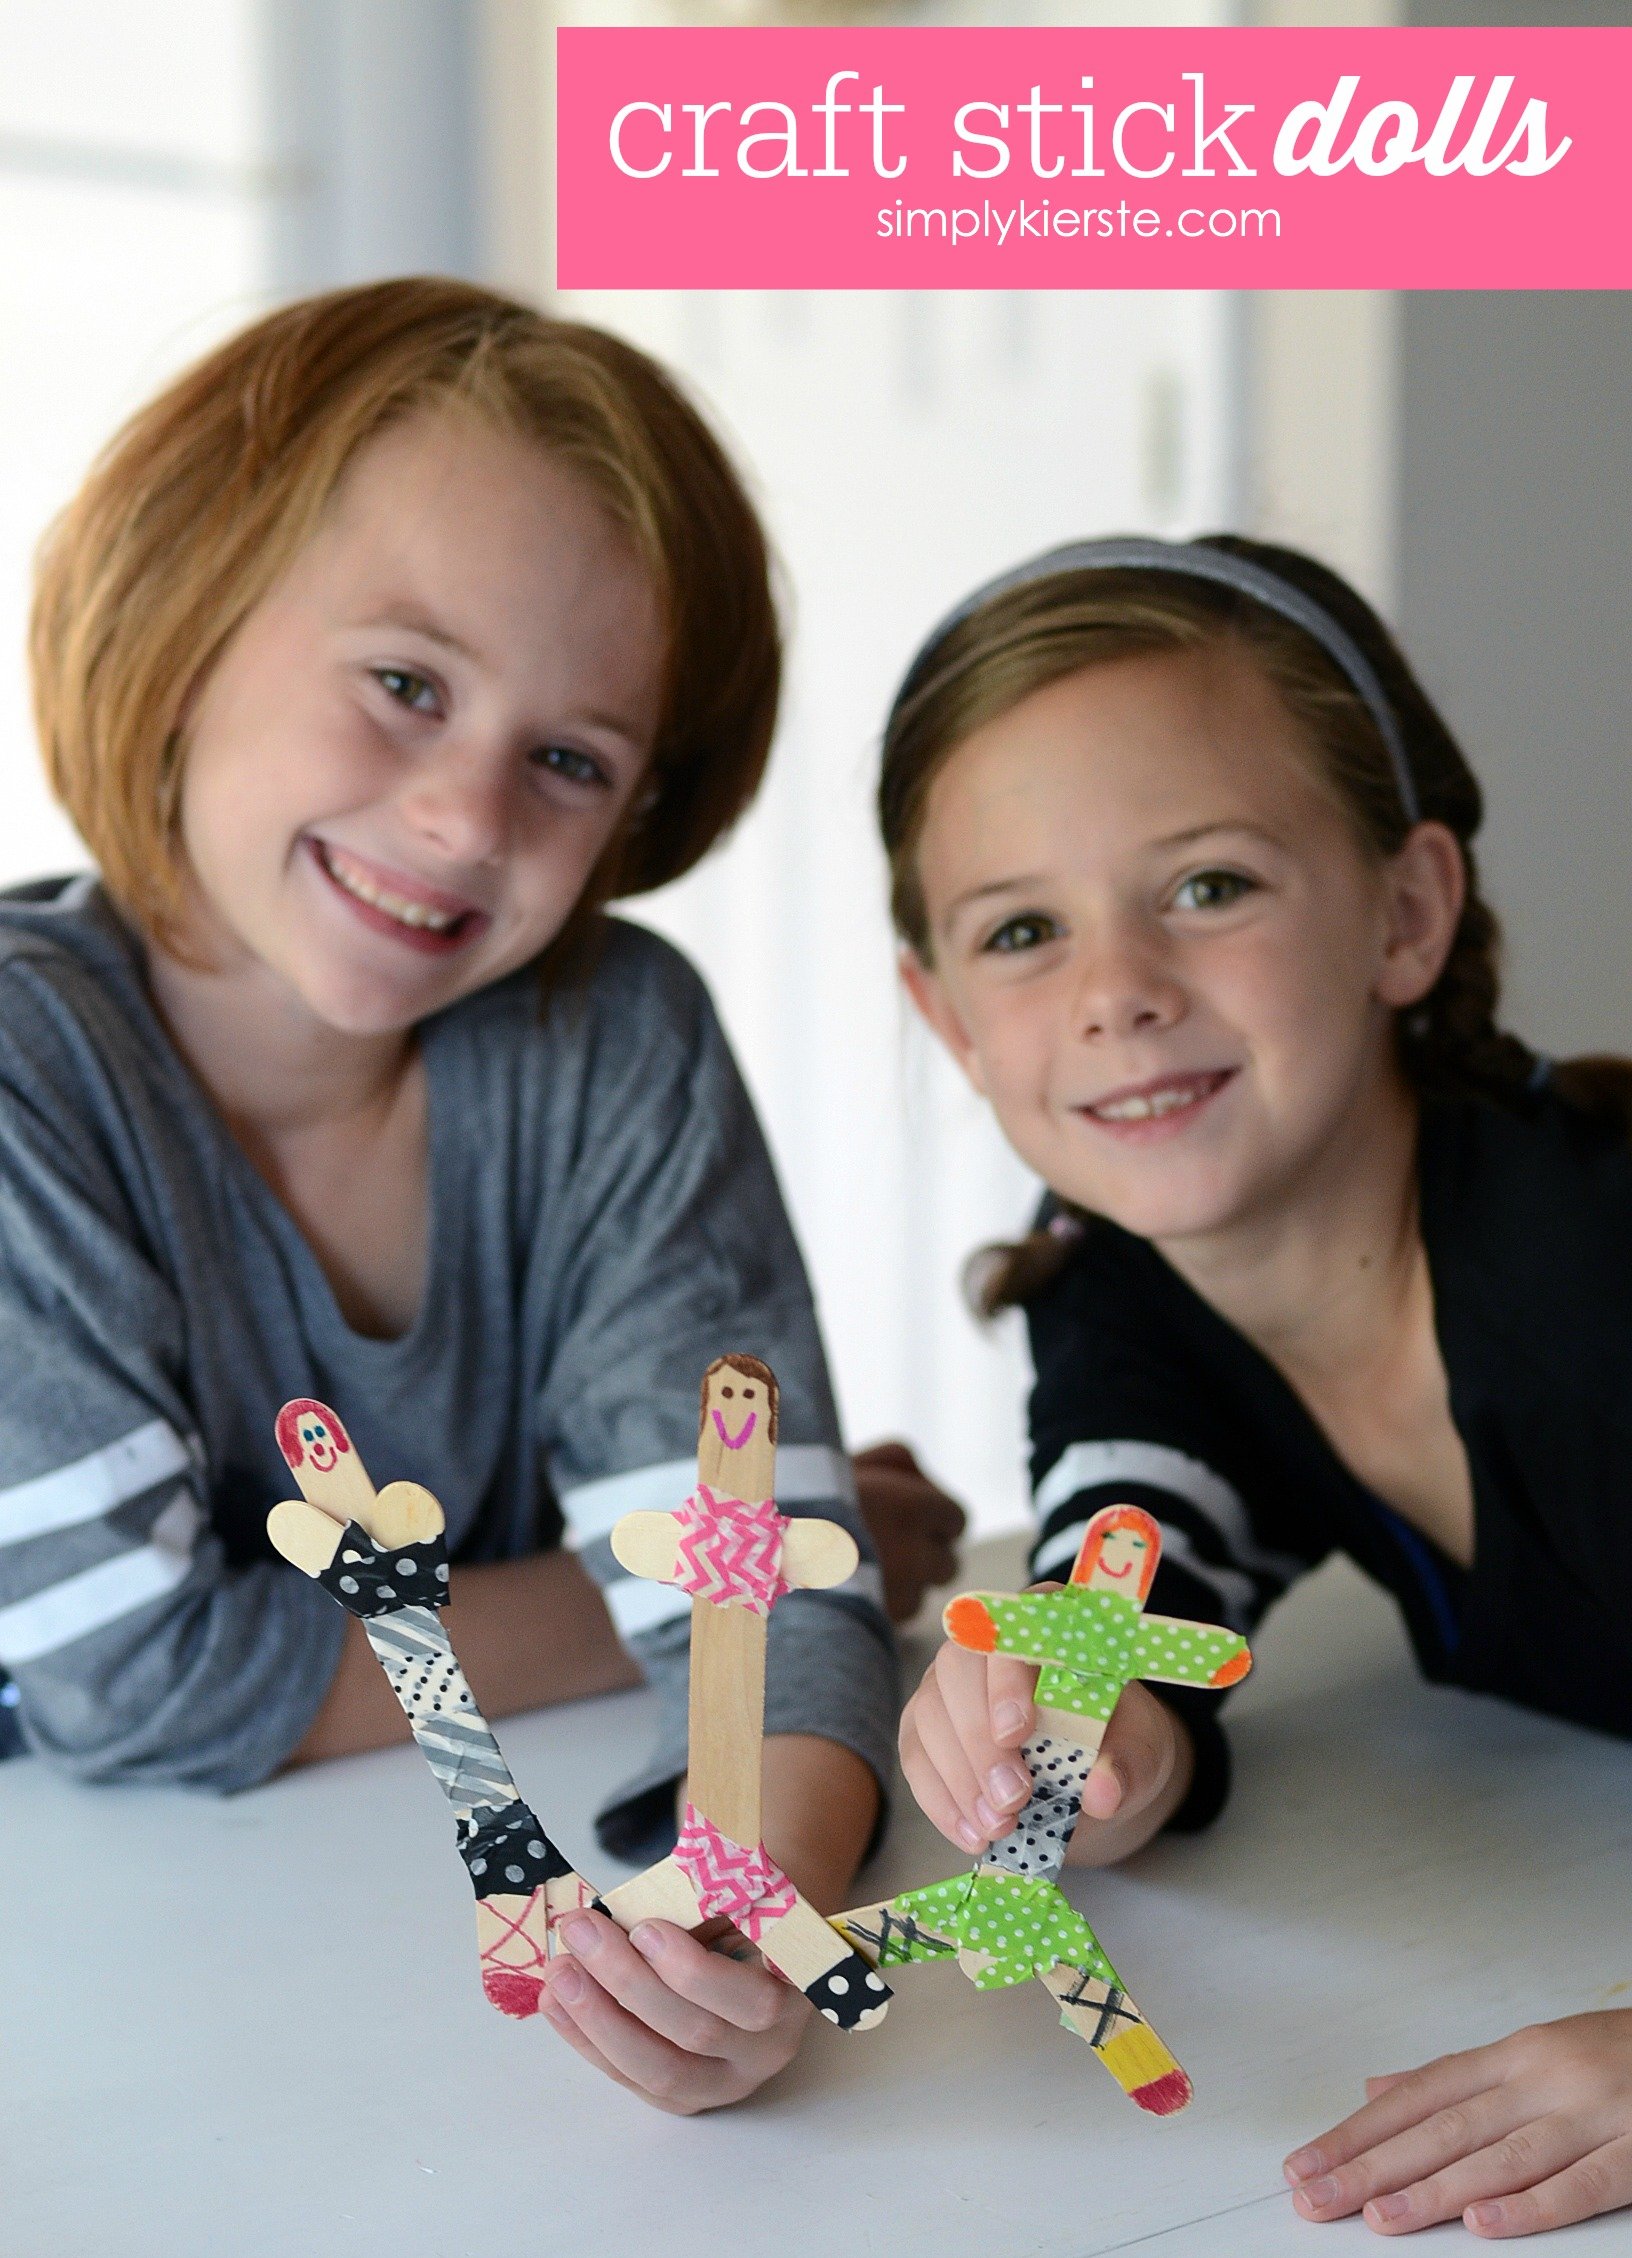 Craft Stick Dolls: An Easy Craft for Kids